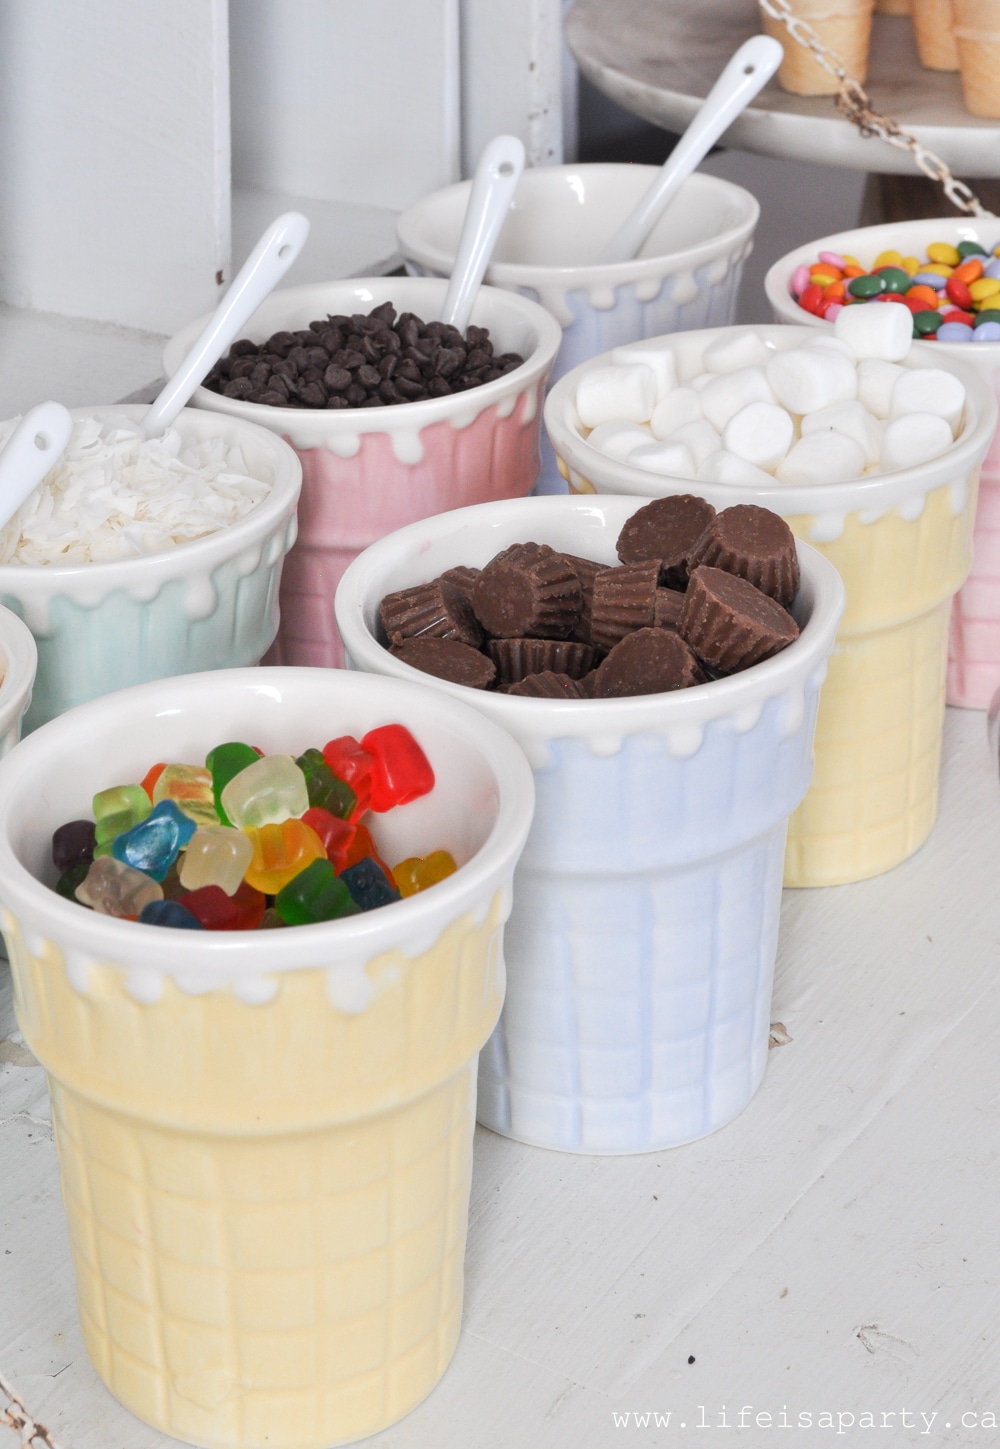 Ice Cream Party Activities: invent your own flavour of ice cream, make ice cream cone crafts, have an ice cream taste test, play ice cream shop, and more!